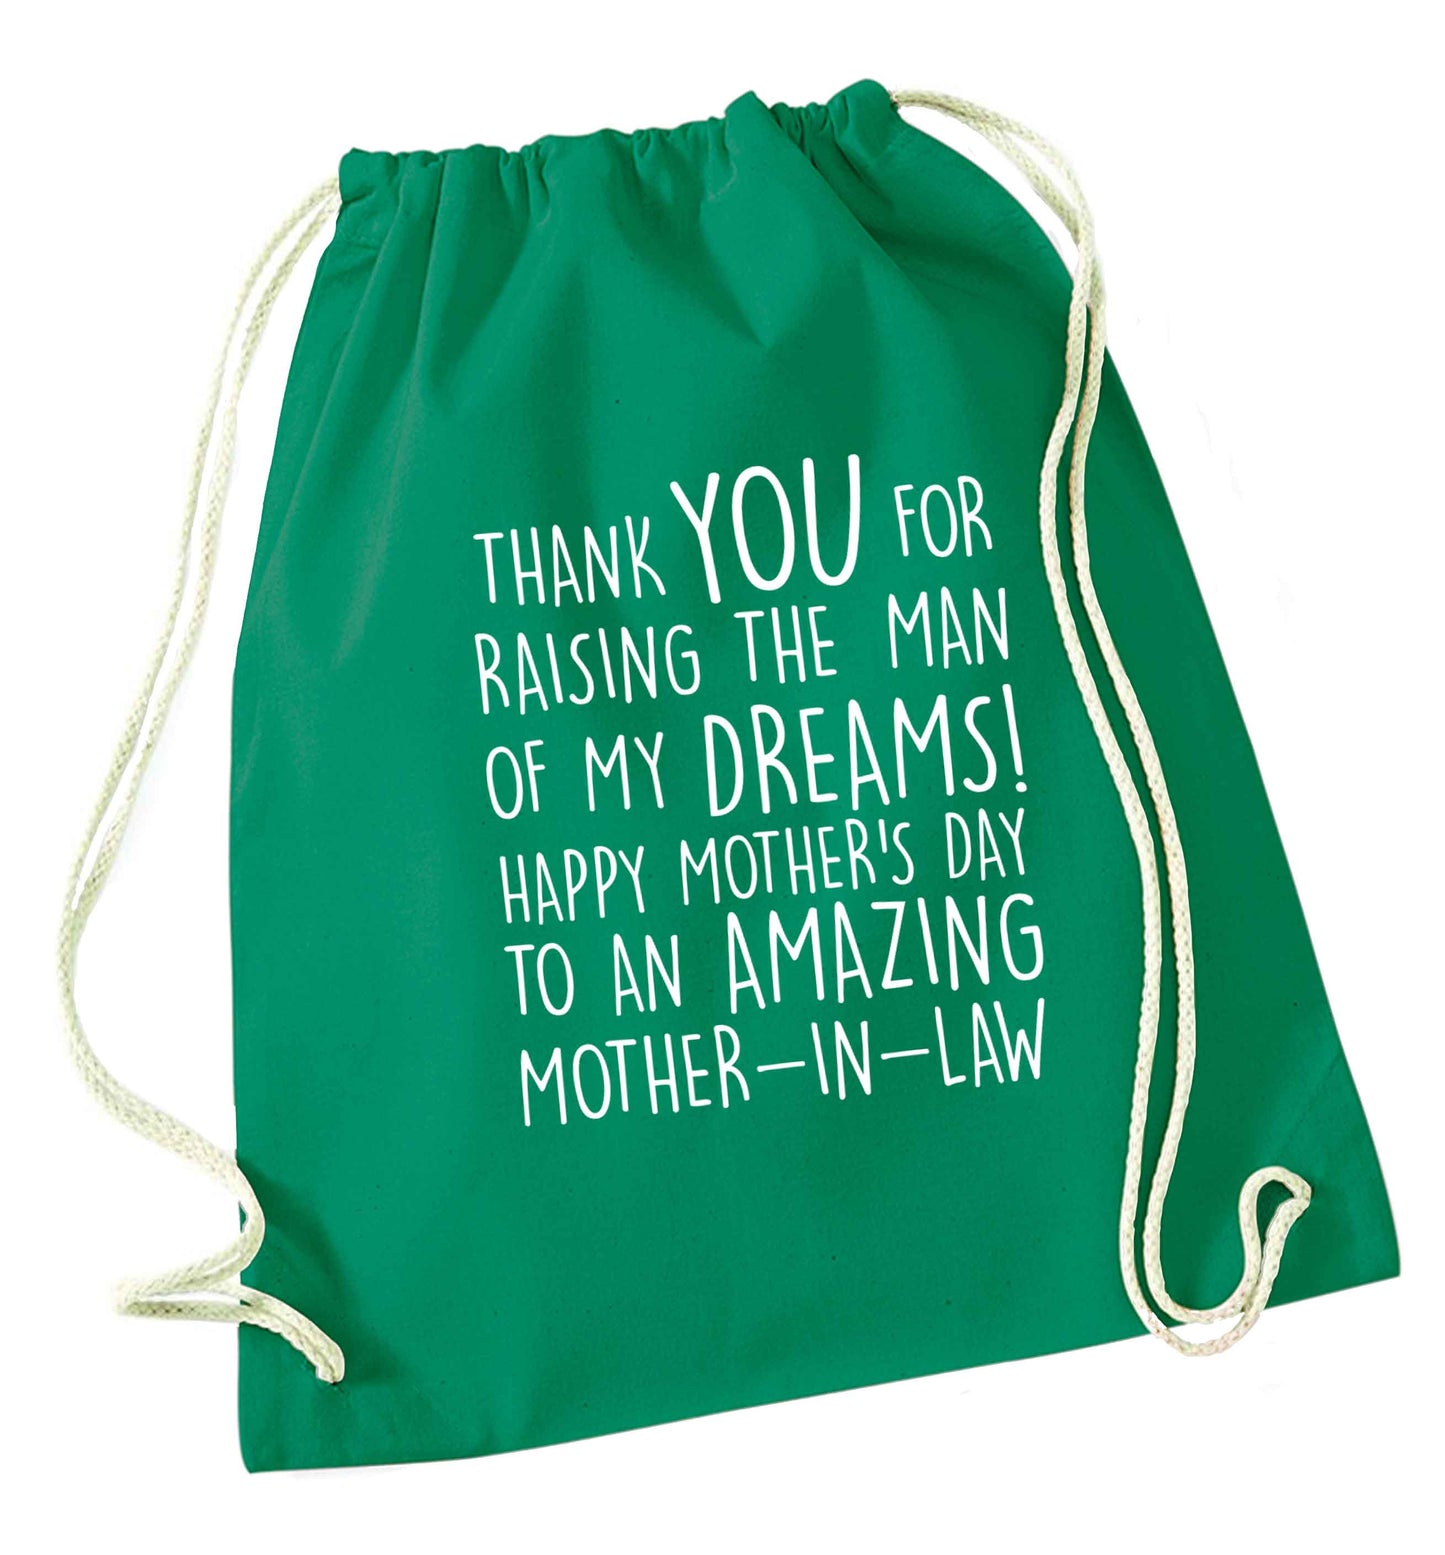 Raising the man of my dreams mother's day mother-in-law green drawstring bag